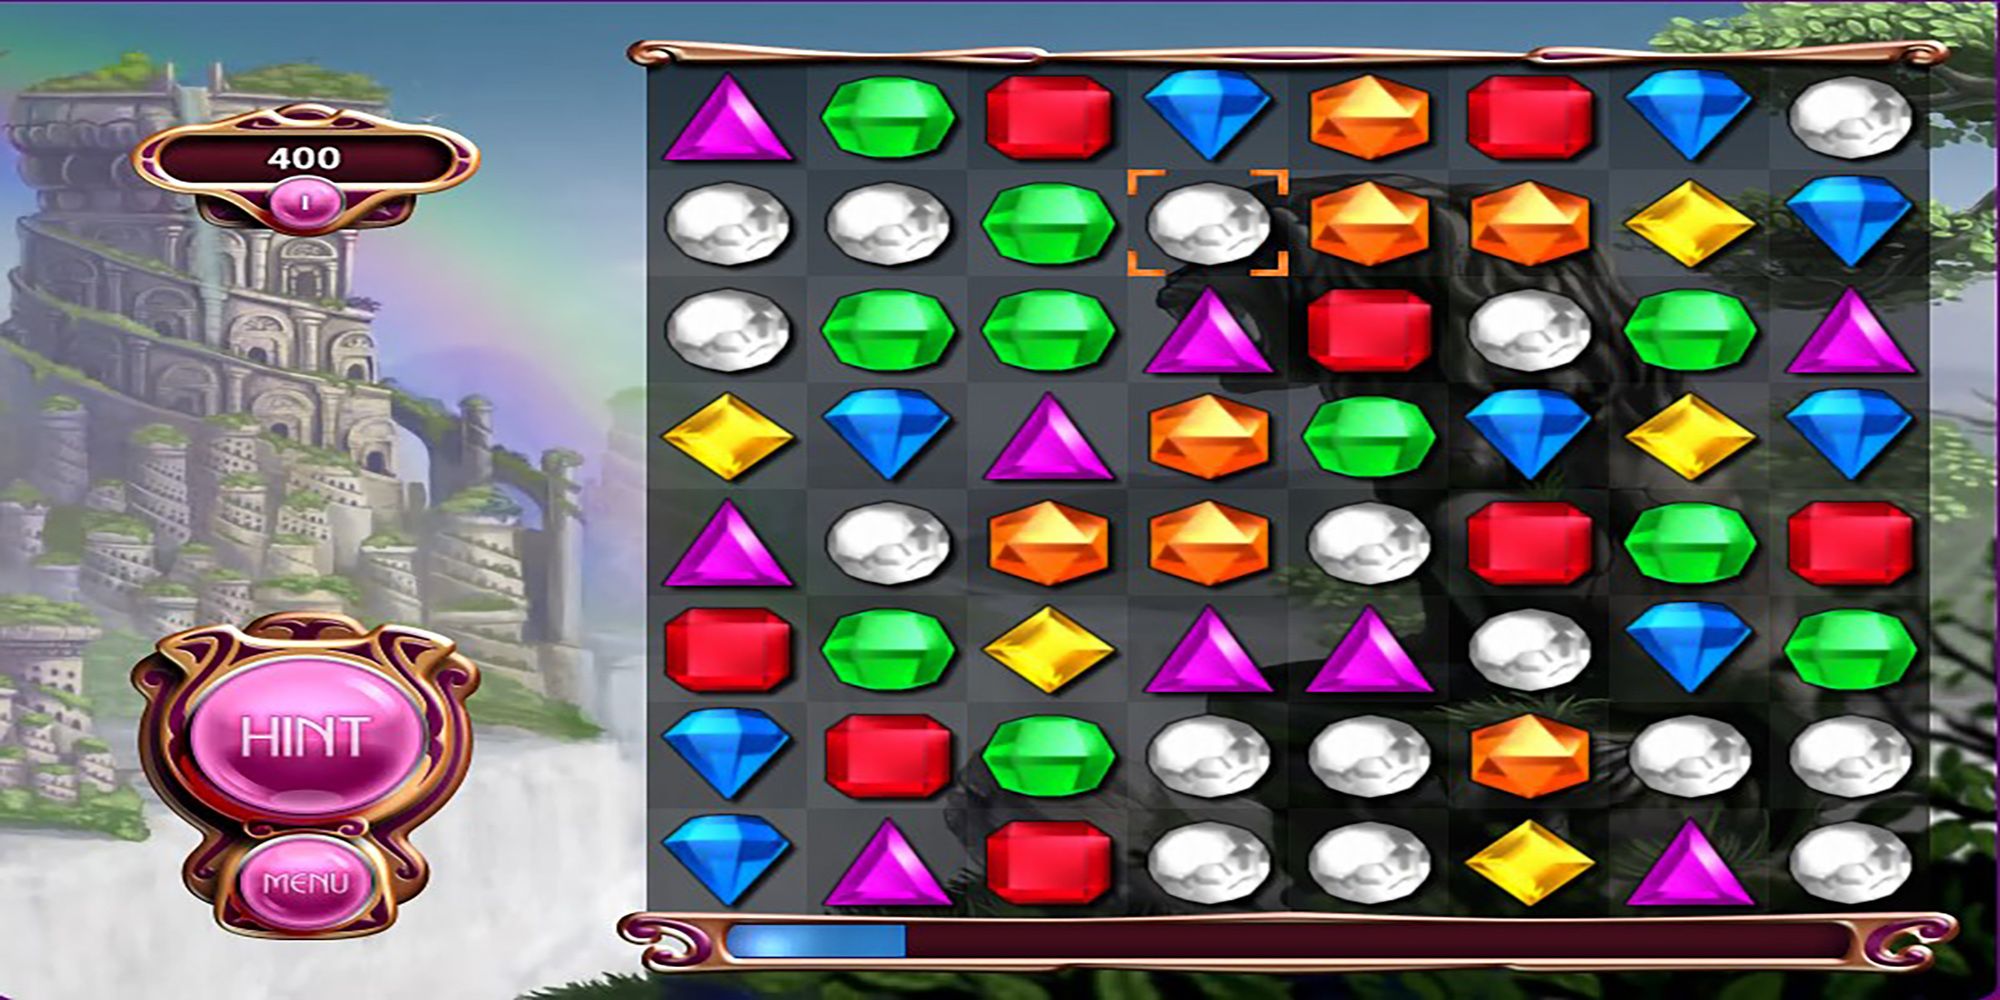 A grid of gems bely a mountain adored with fountains in Bejeweled 3 for PC.